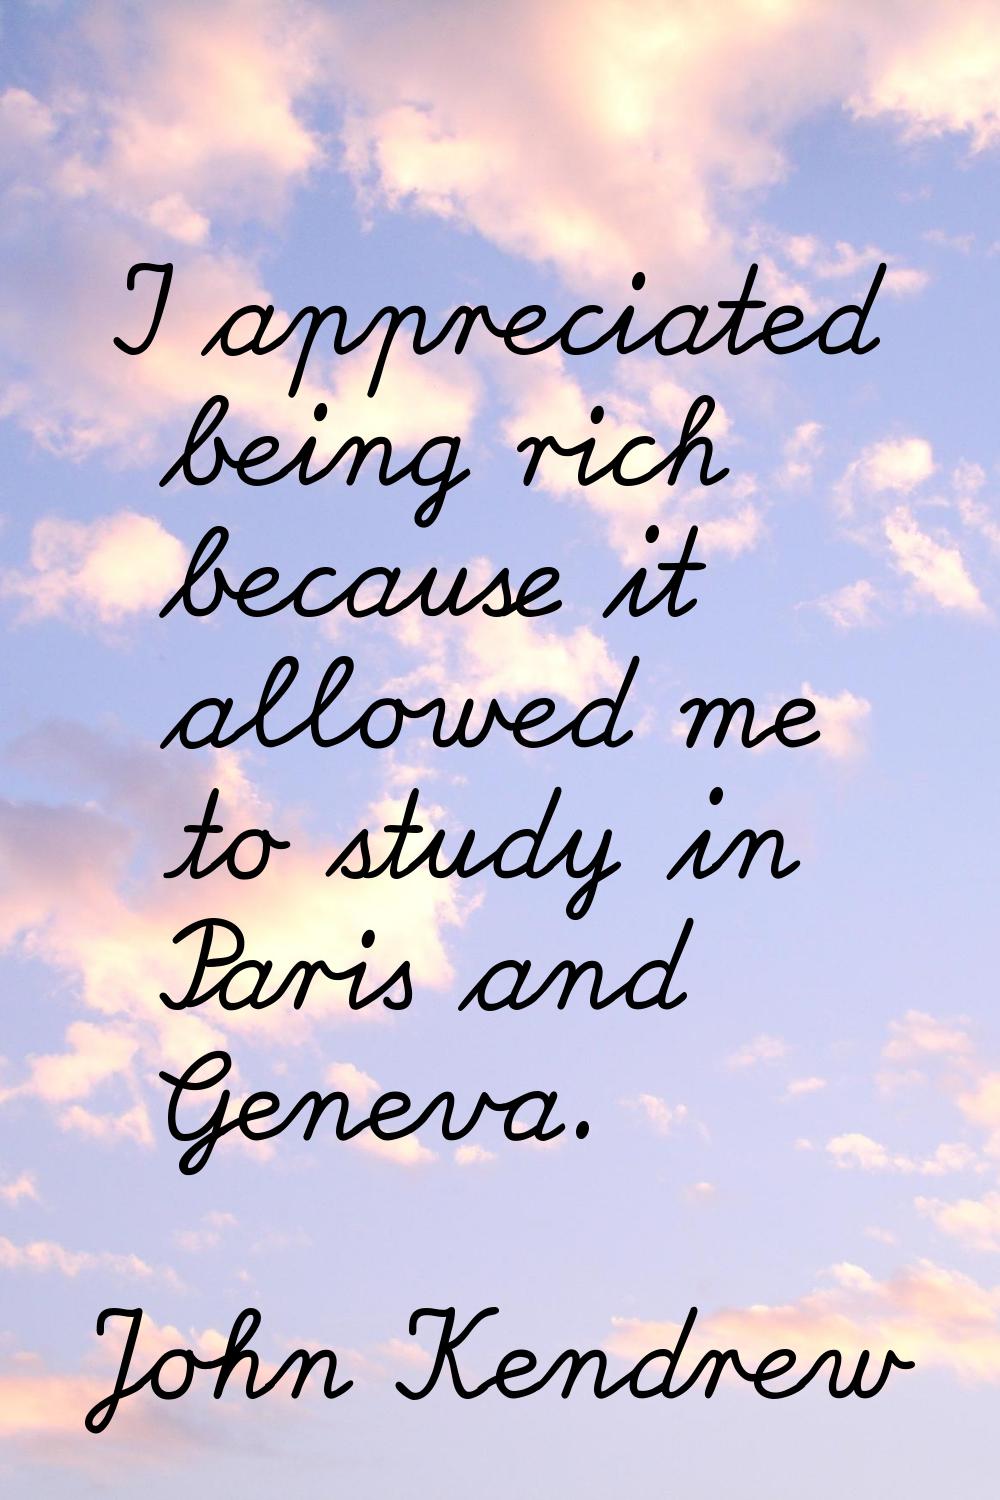 I appreciated being rich because it allowed me to study in Paris and Geneva.